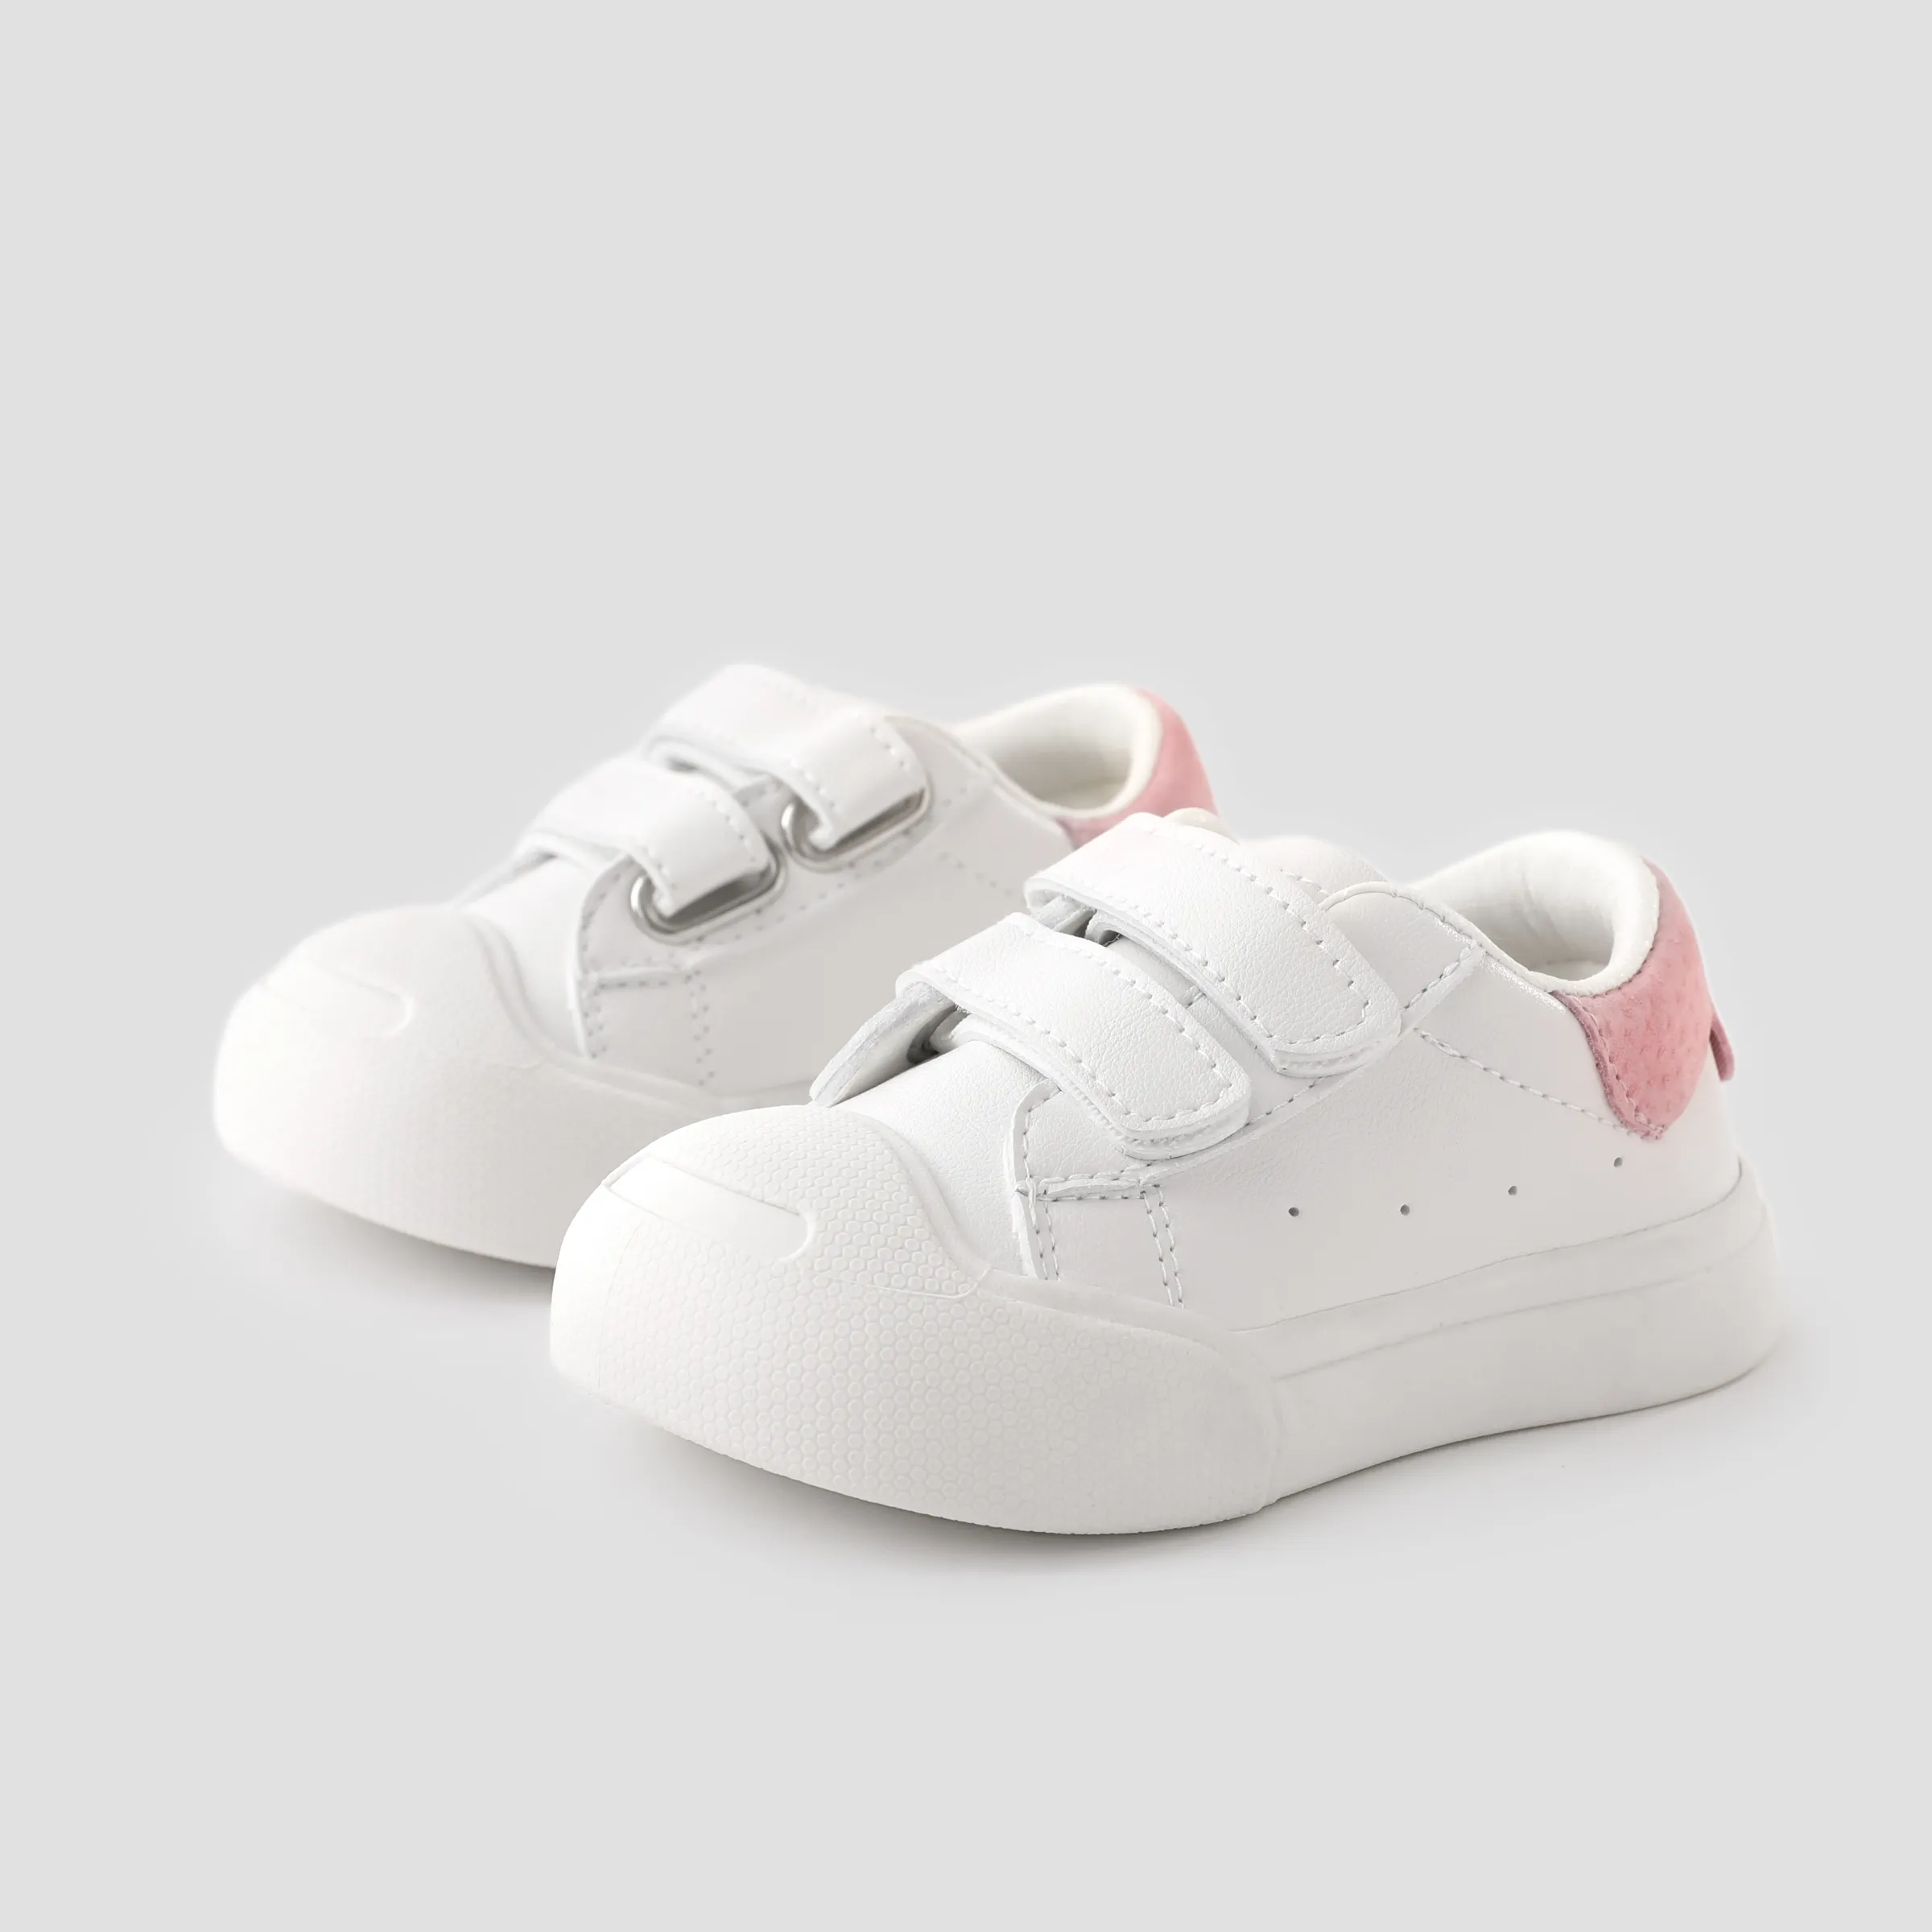 Toddler/Kids Girl Solid Velcro Leather Sports Shoes